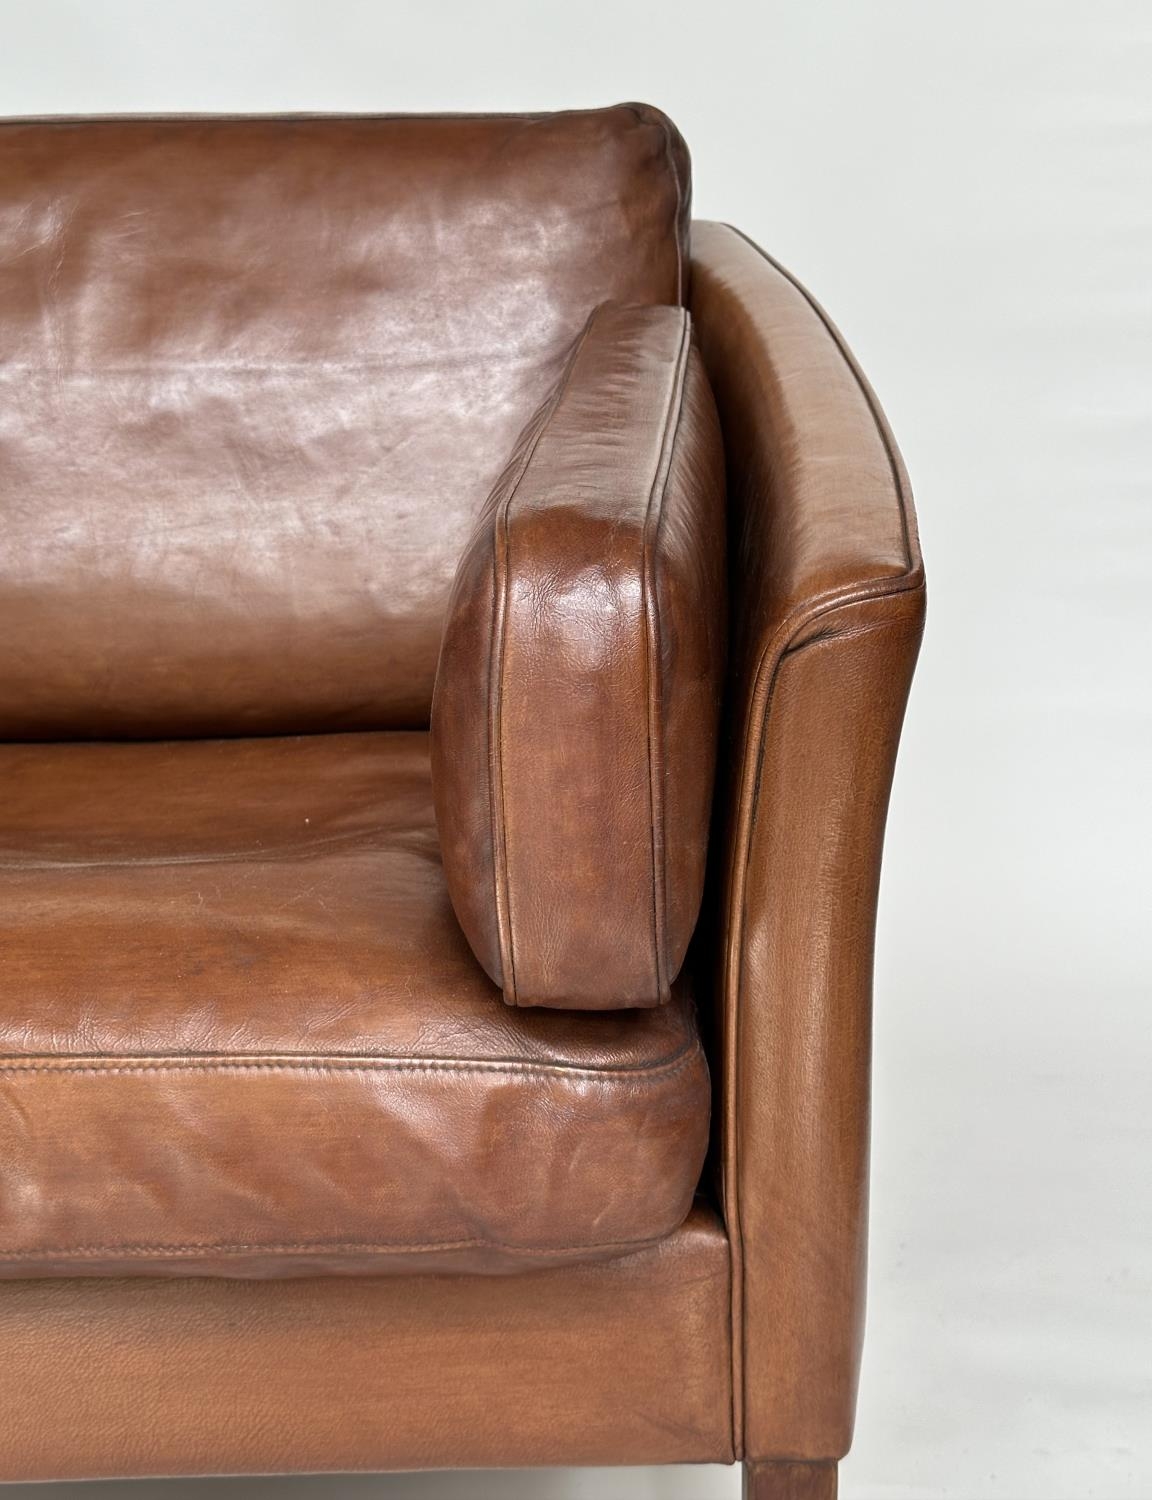 DANISH SOFA, 1970s two seater with grained natural soft tam brown leather upholstered, 150cm W. - Image 2 of 8